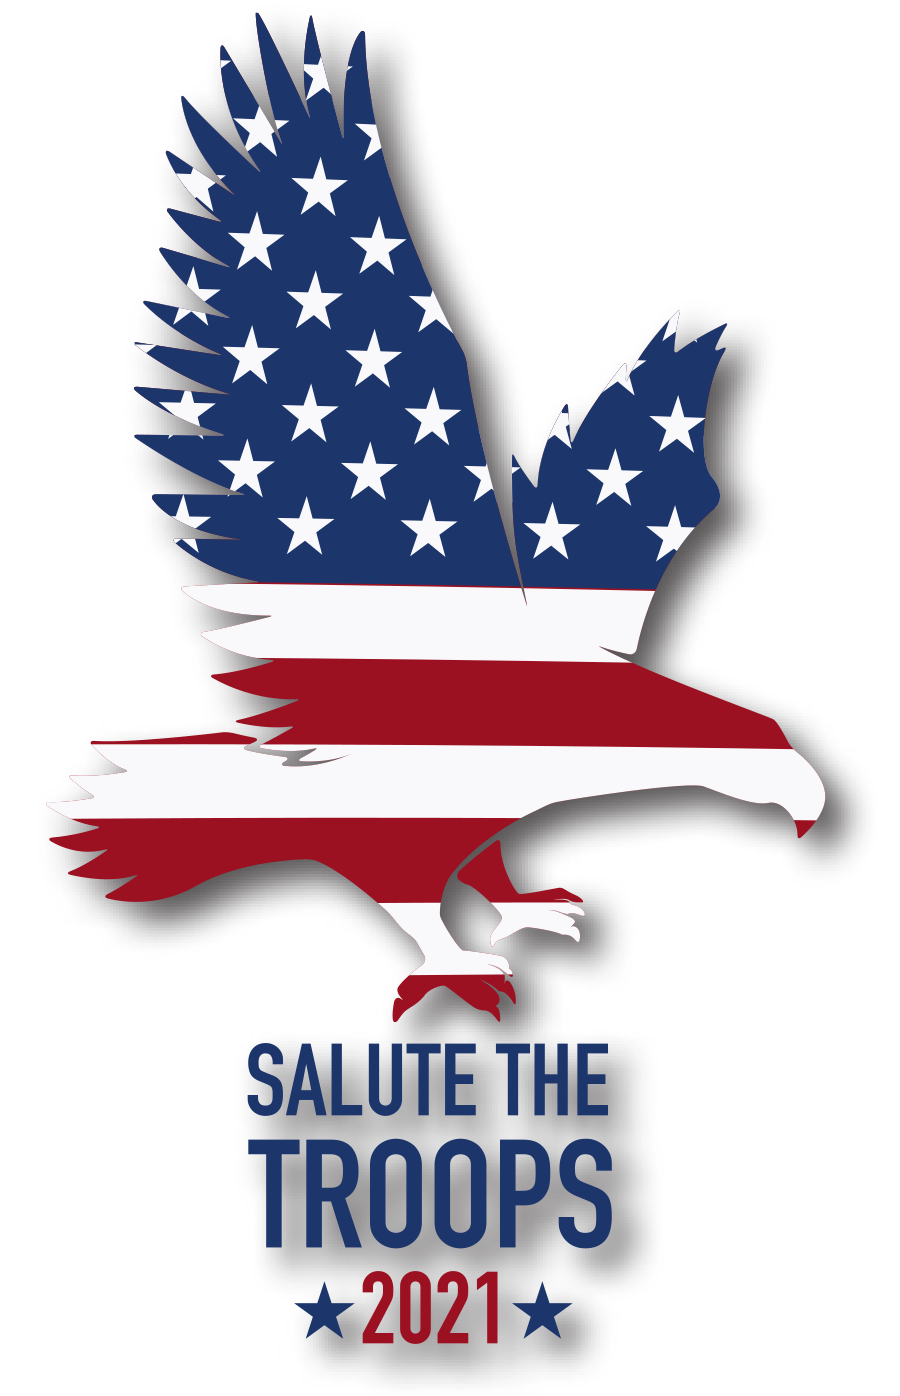 Salute The Troops 2021 eagle graphic